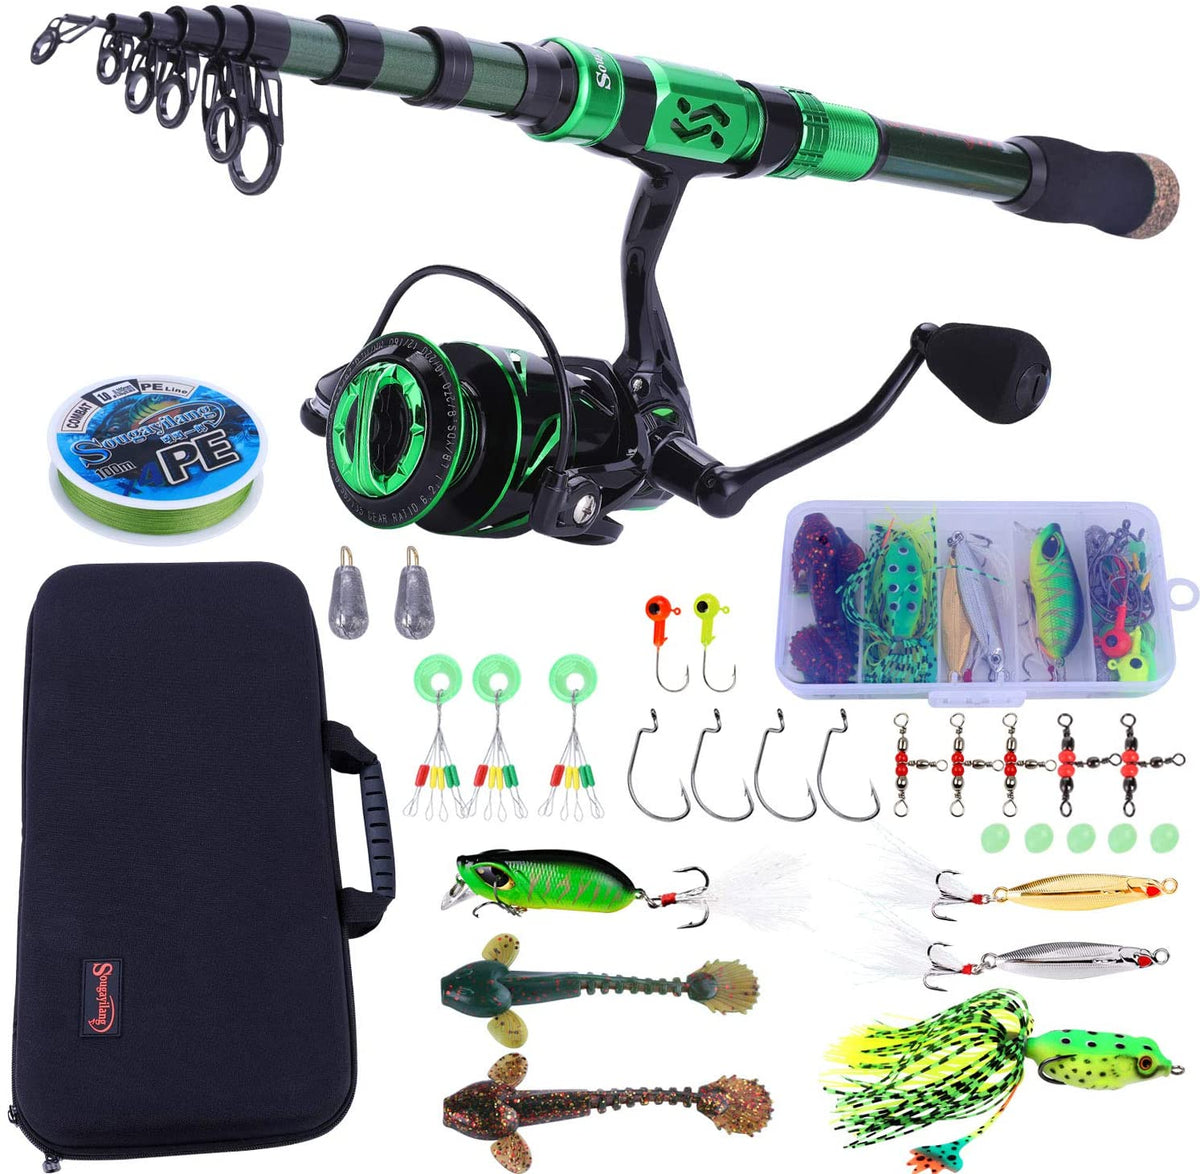  Sougayilang Fishing Rod Reel Combos Carbon Fiber Telescopic  Fishing Pole with Spinning Reel Fishing Line Lures Fishing Gear Accessories  for Travel Saltwater Freshwater Fishing-1.8M/5.91Ft : Sports & Outdoors